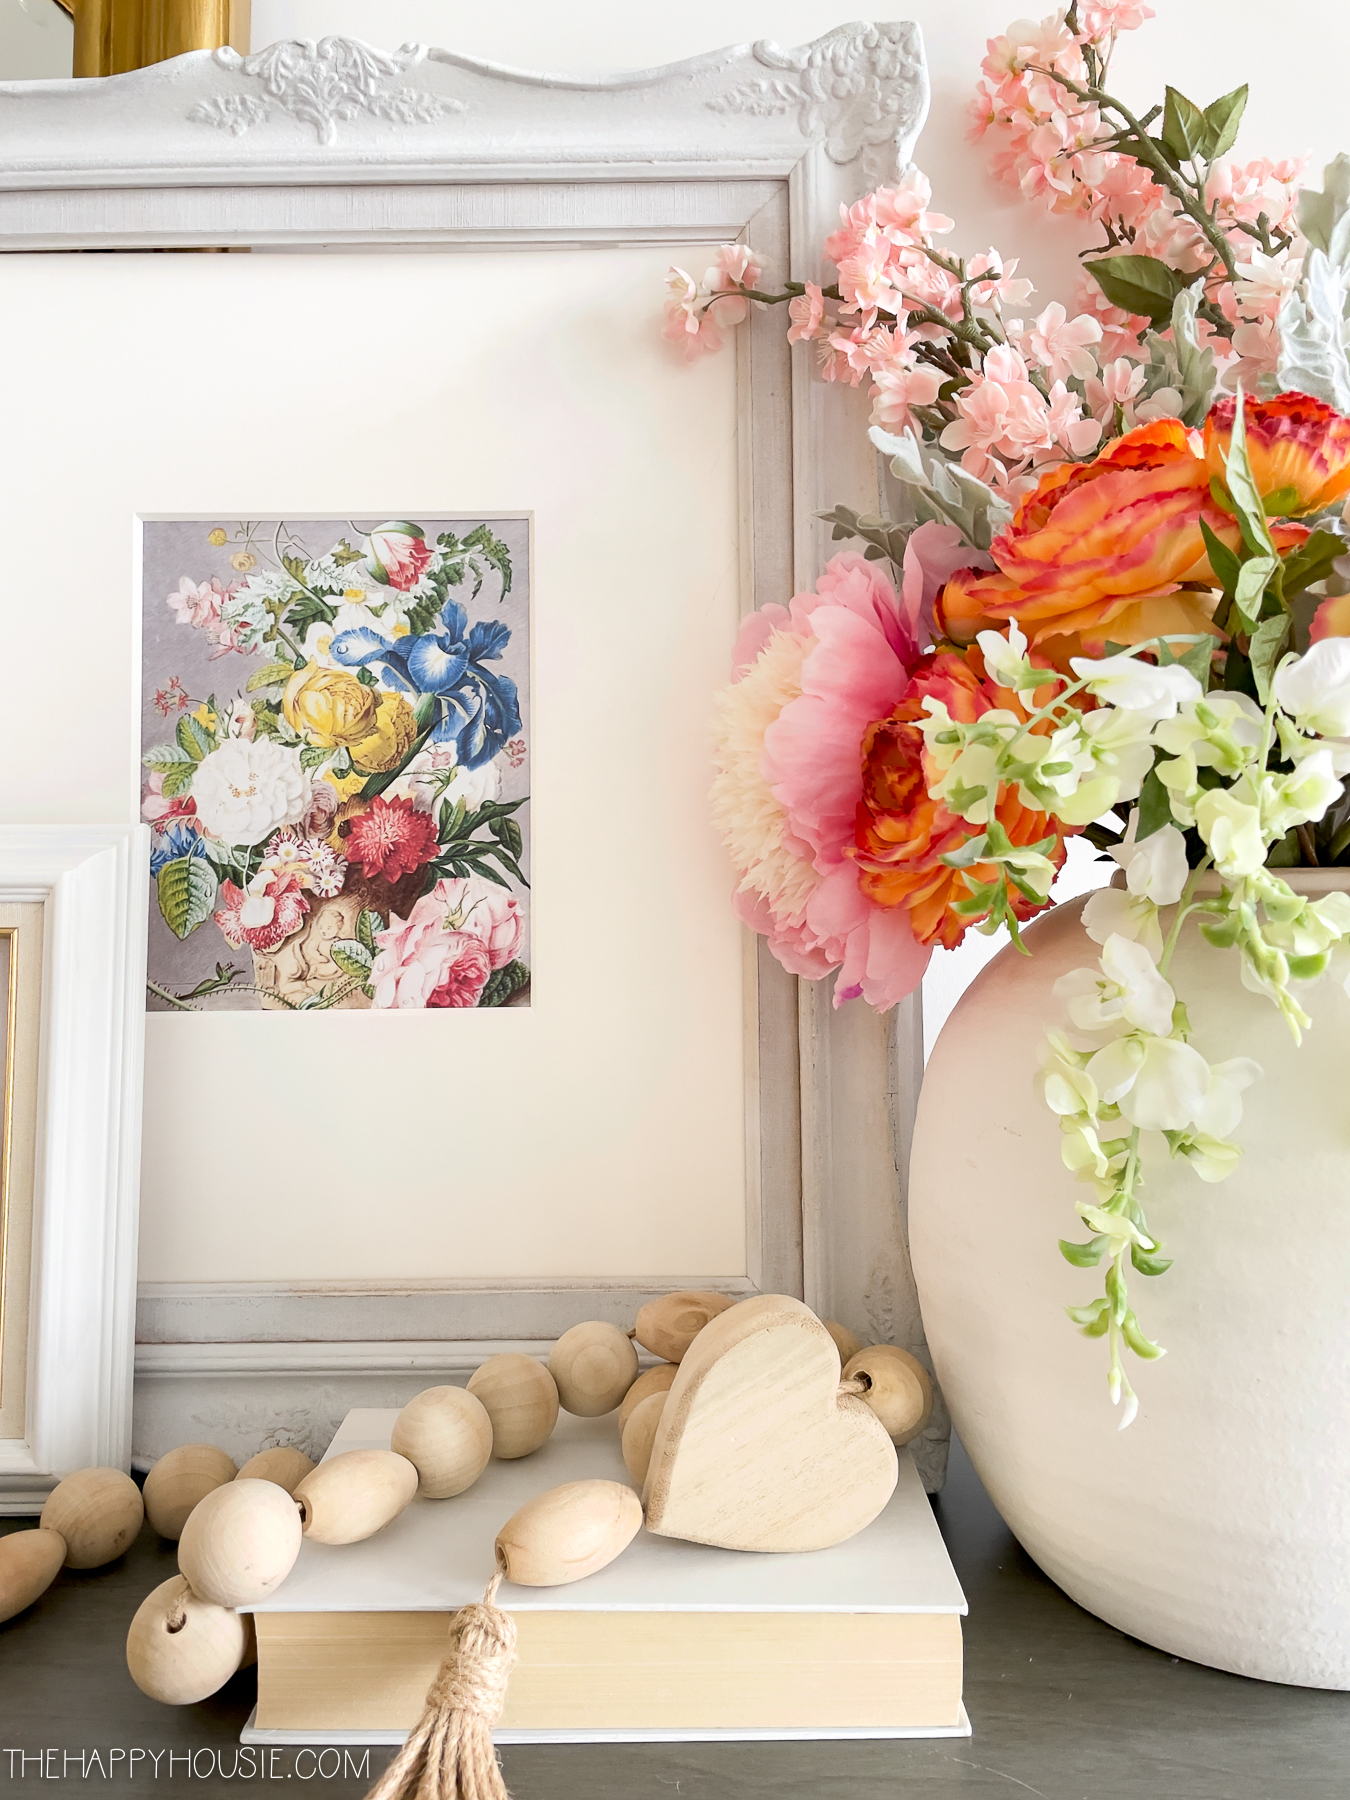 Rose Bouquet Art Print Cozy Floral Art for Bedroom Valentines Day gift Romantic Art Poster